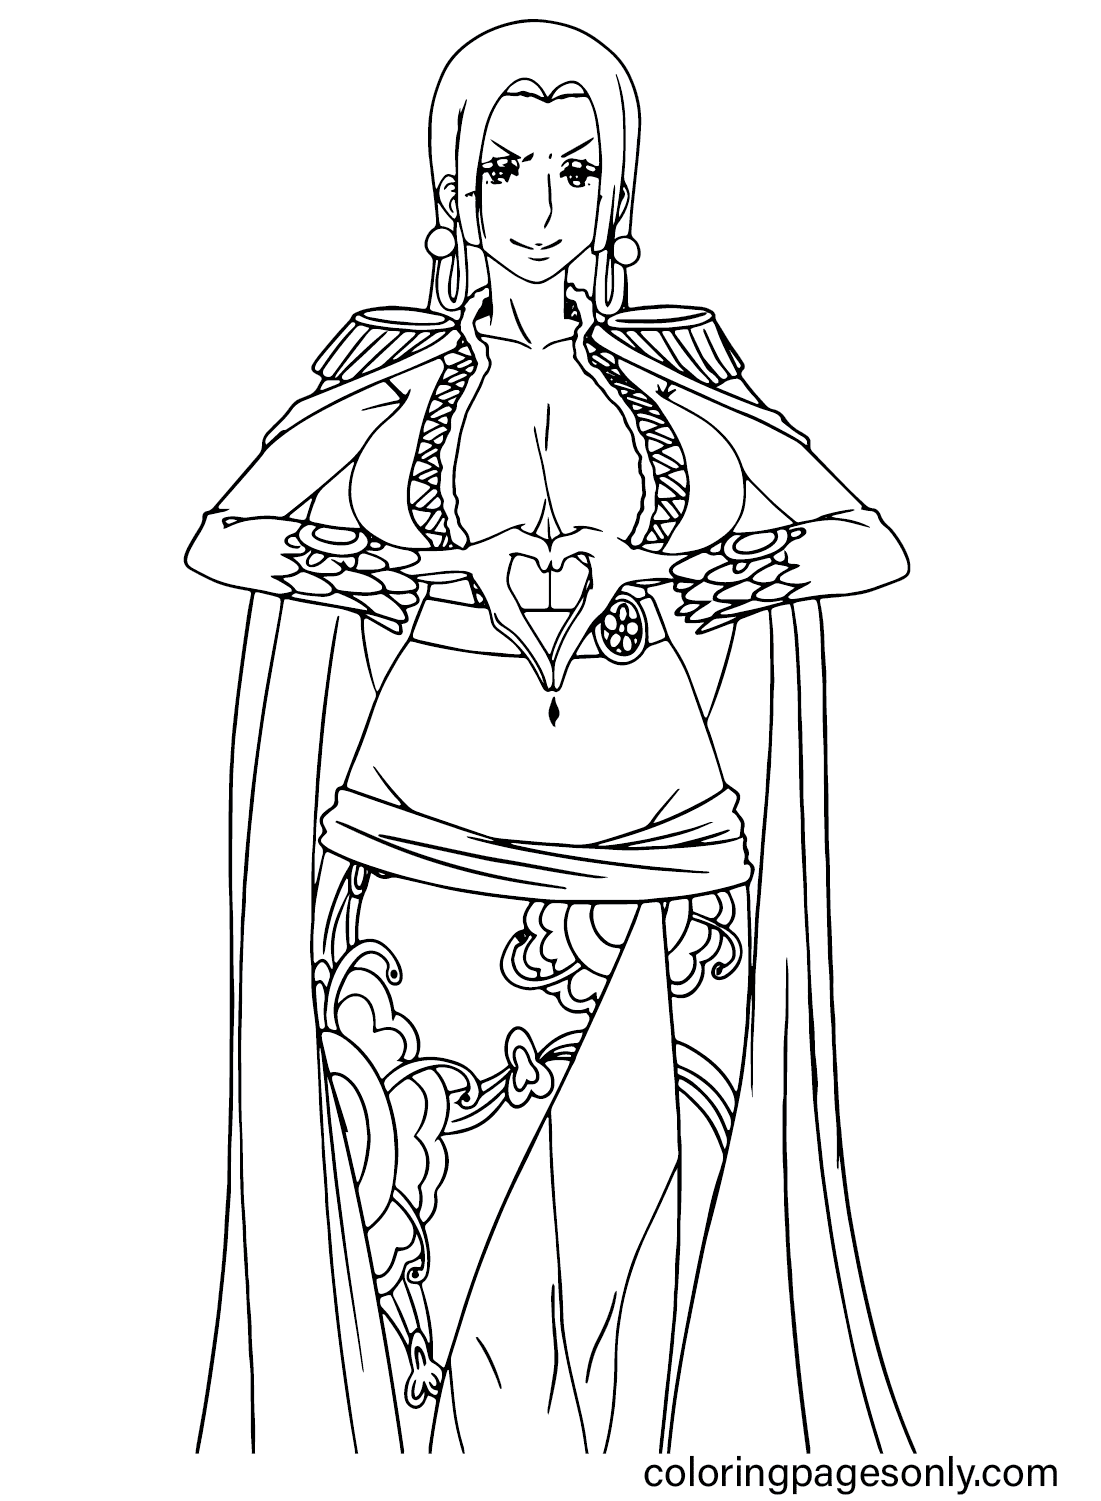 Pictures Boa Hancock Coloring Page from Boa Hancock